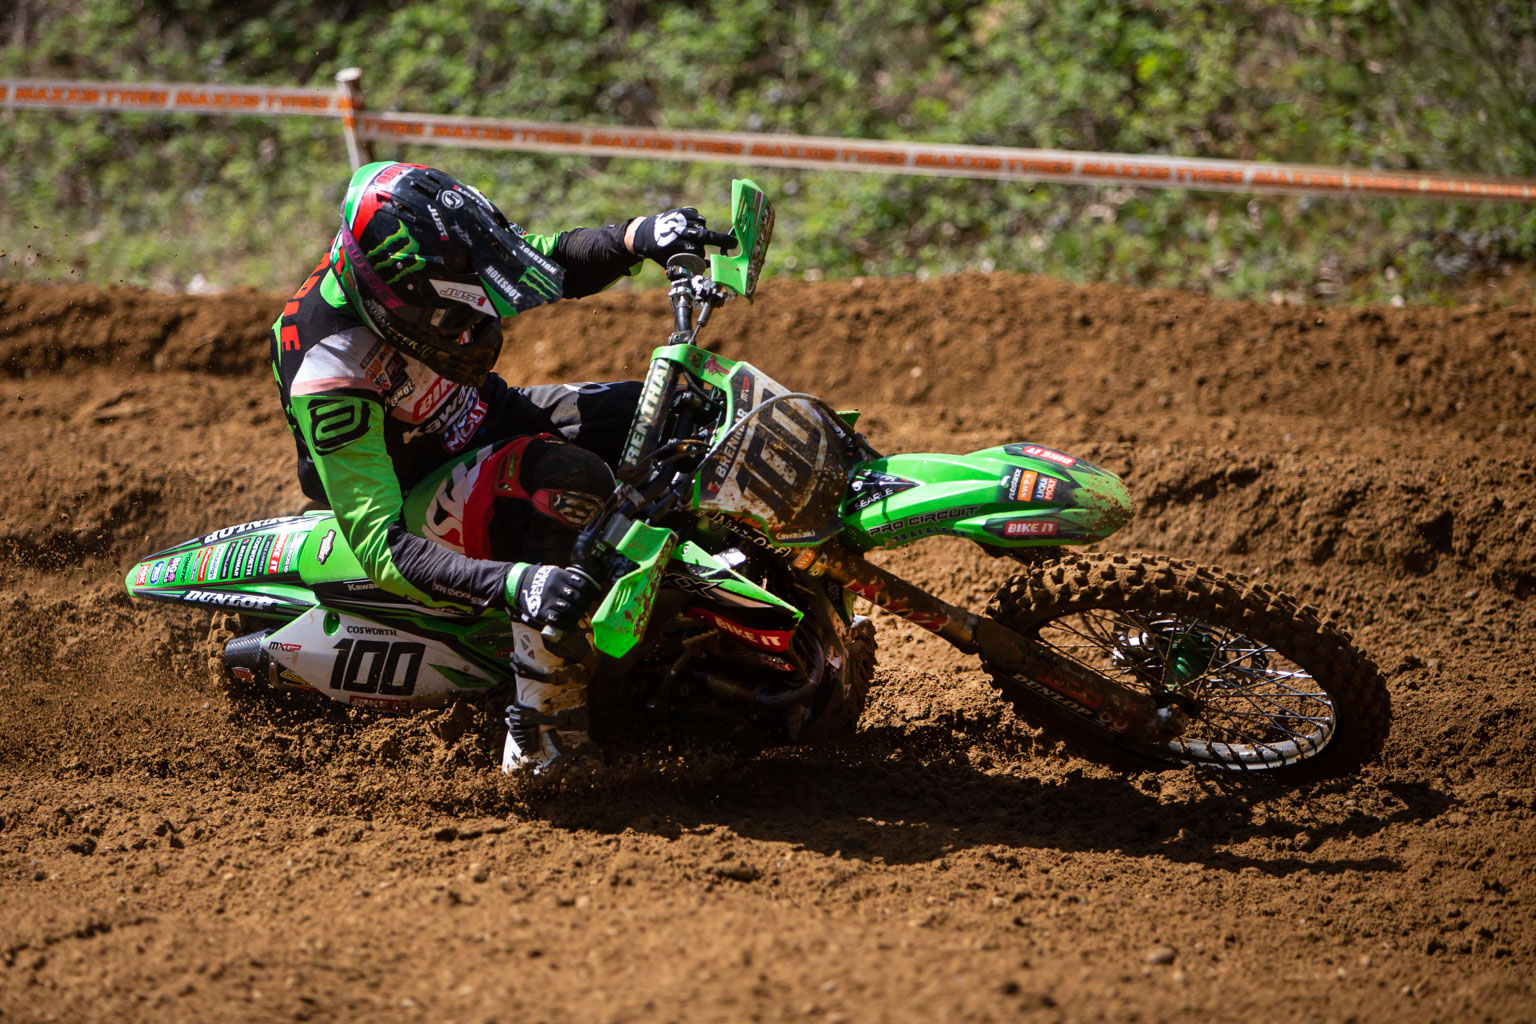 Tommy Searle returned from injury and was brutally quick